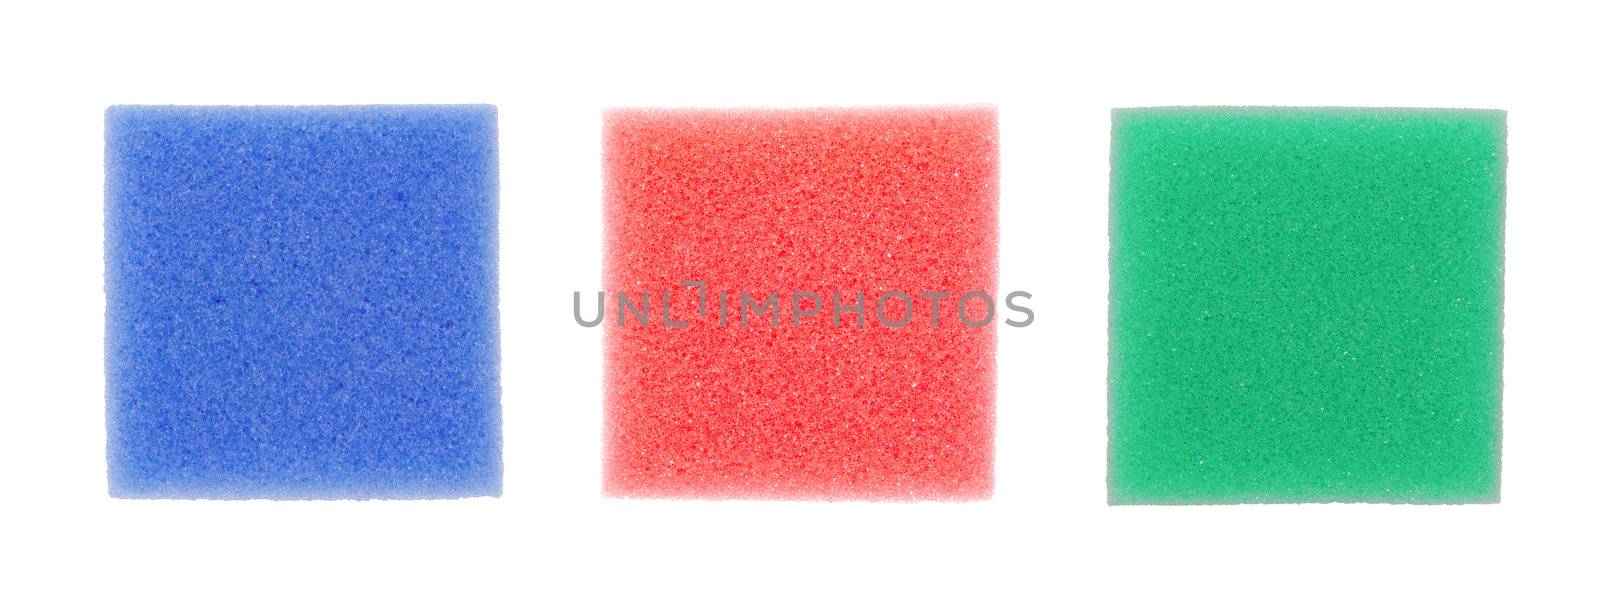 colorful sponges on white